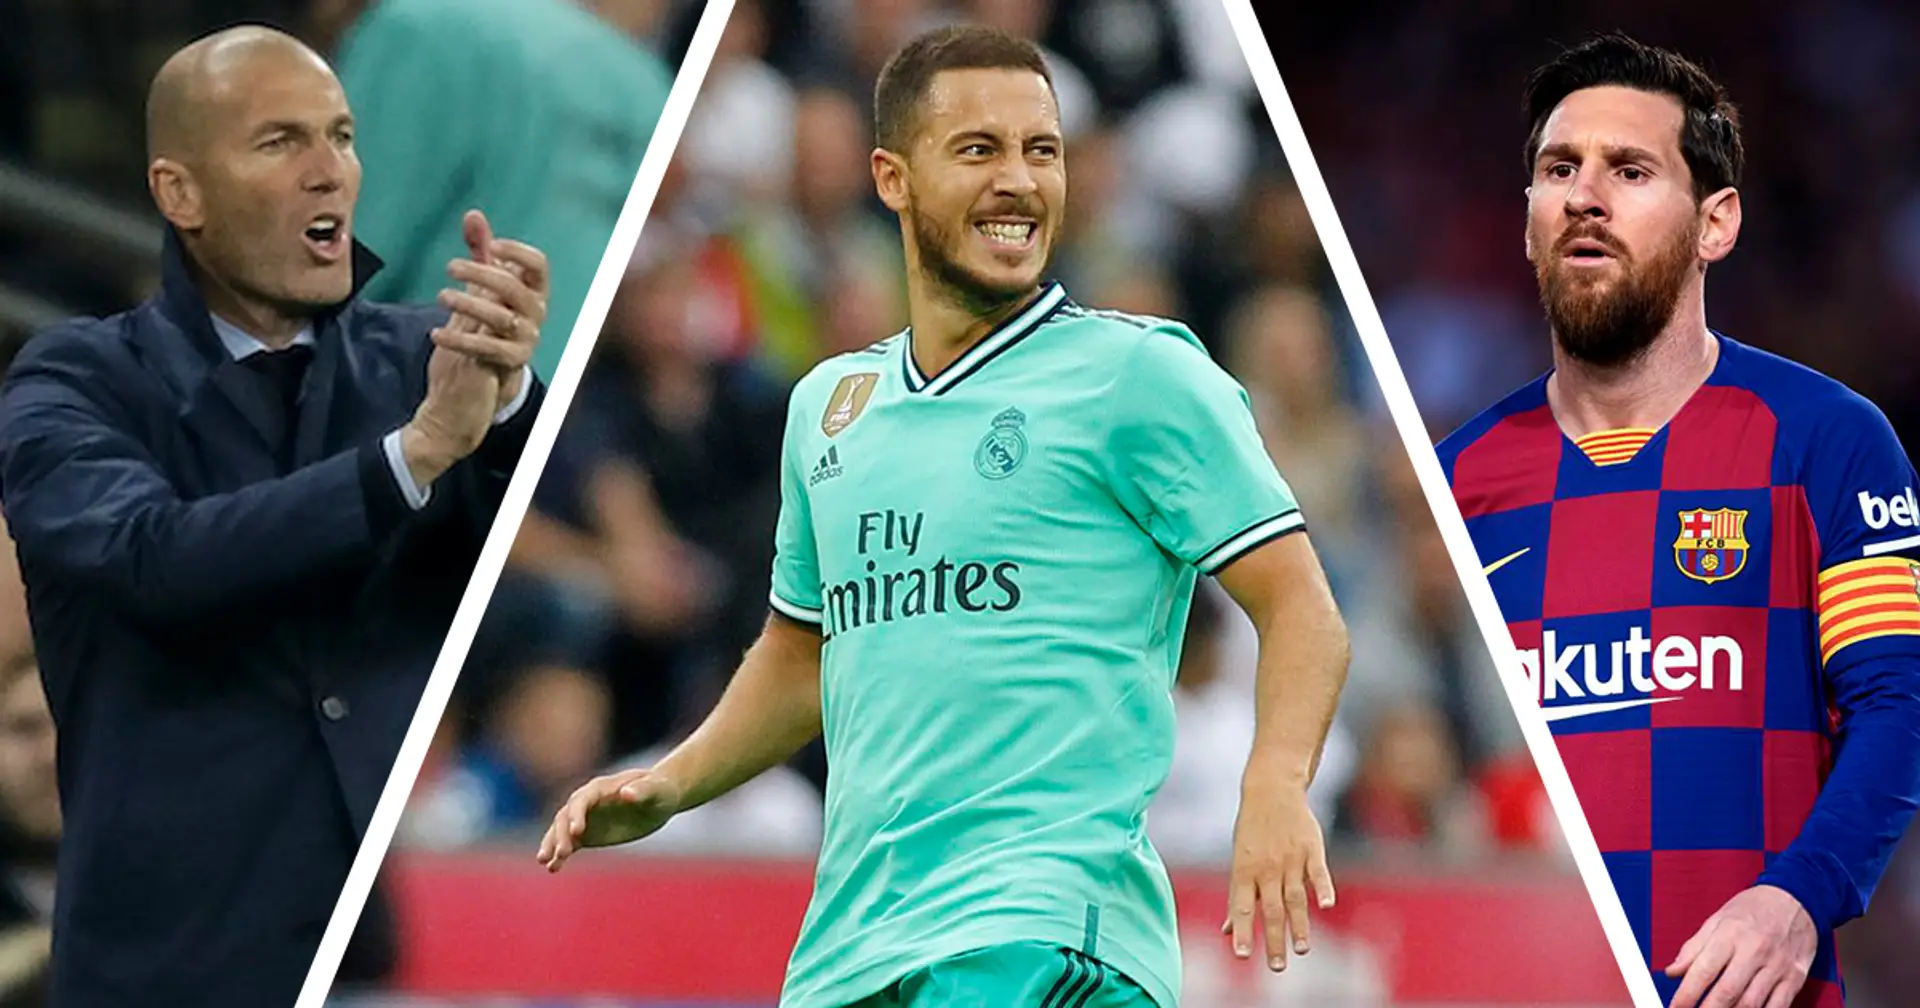 'Stunned' Zidane, Messi comparisons: 7 quotes and 3 rumours highlighting Hazard's dazzling physical form